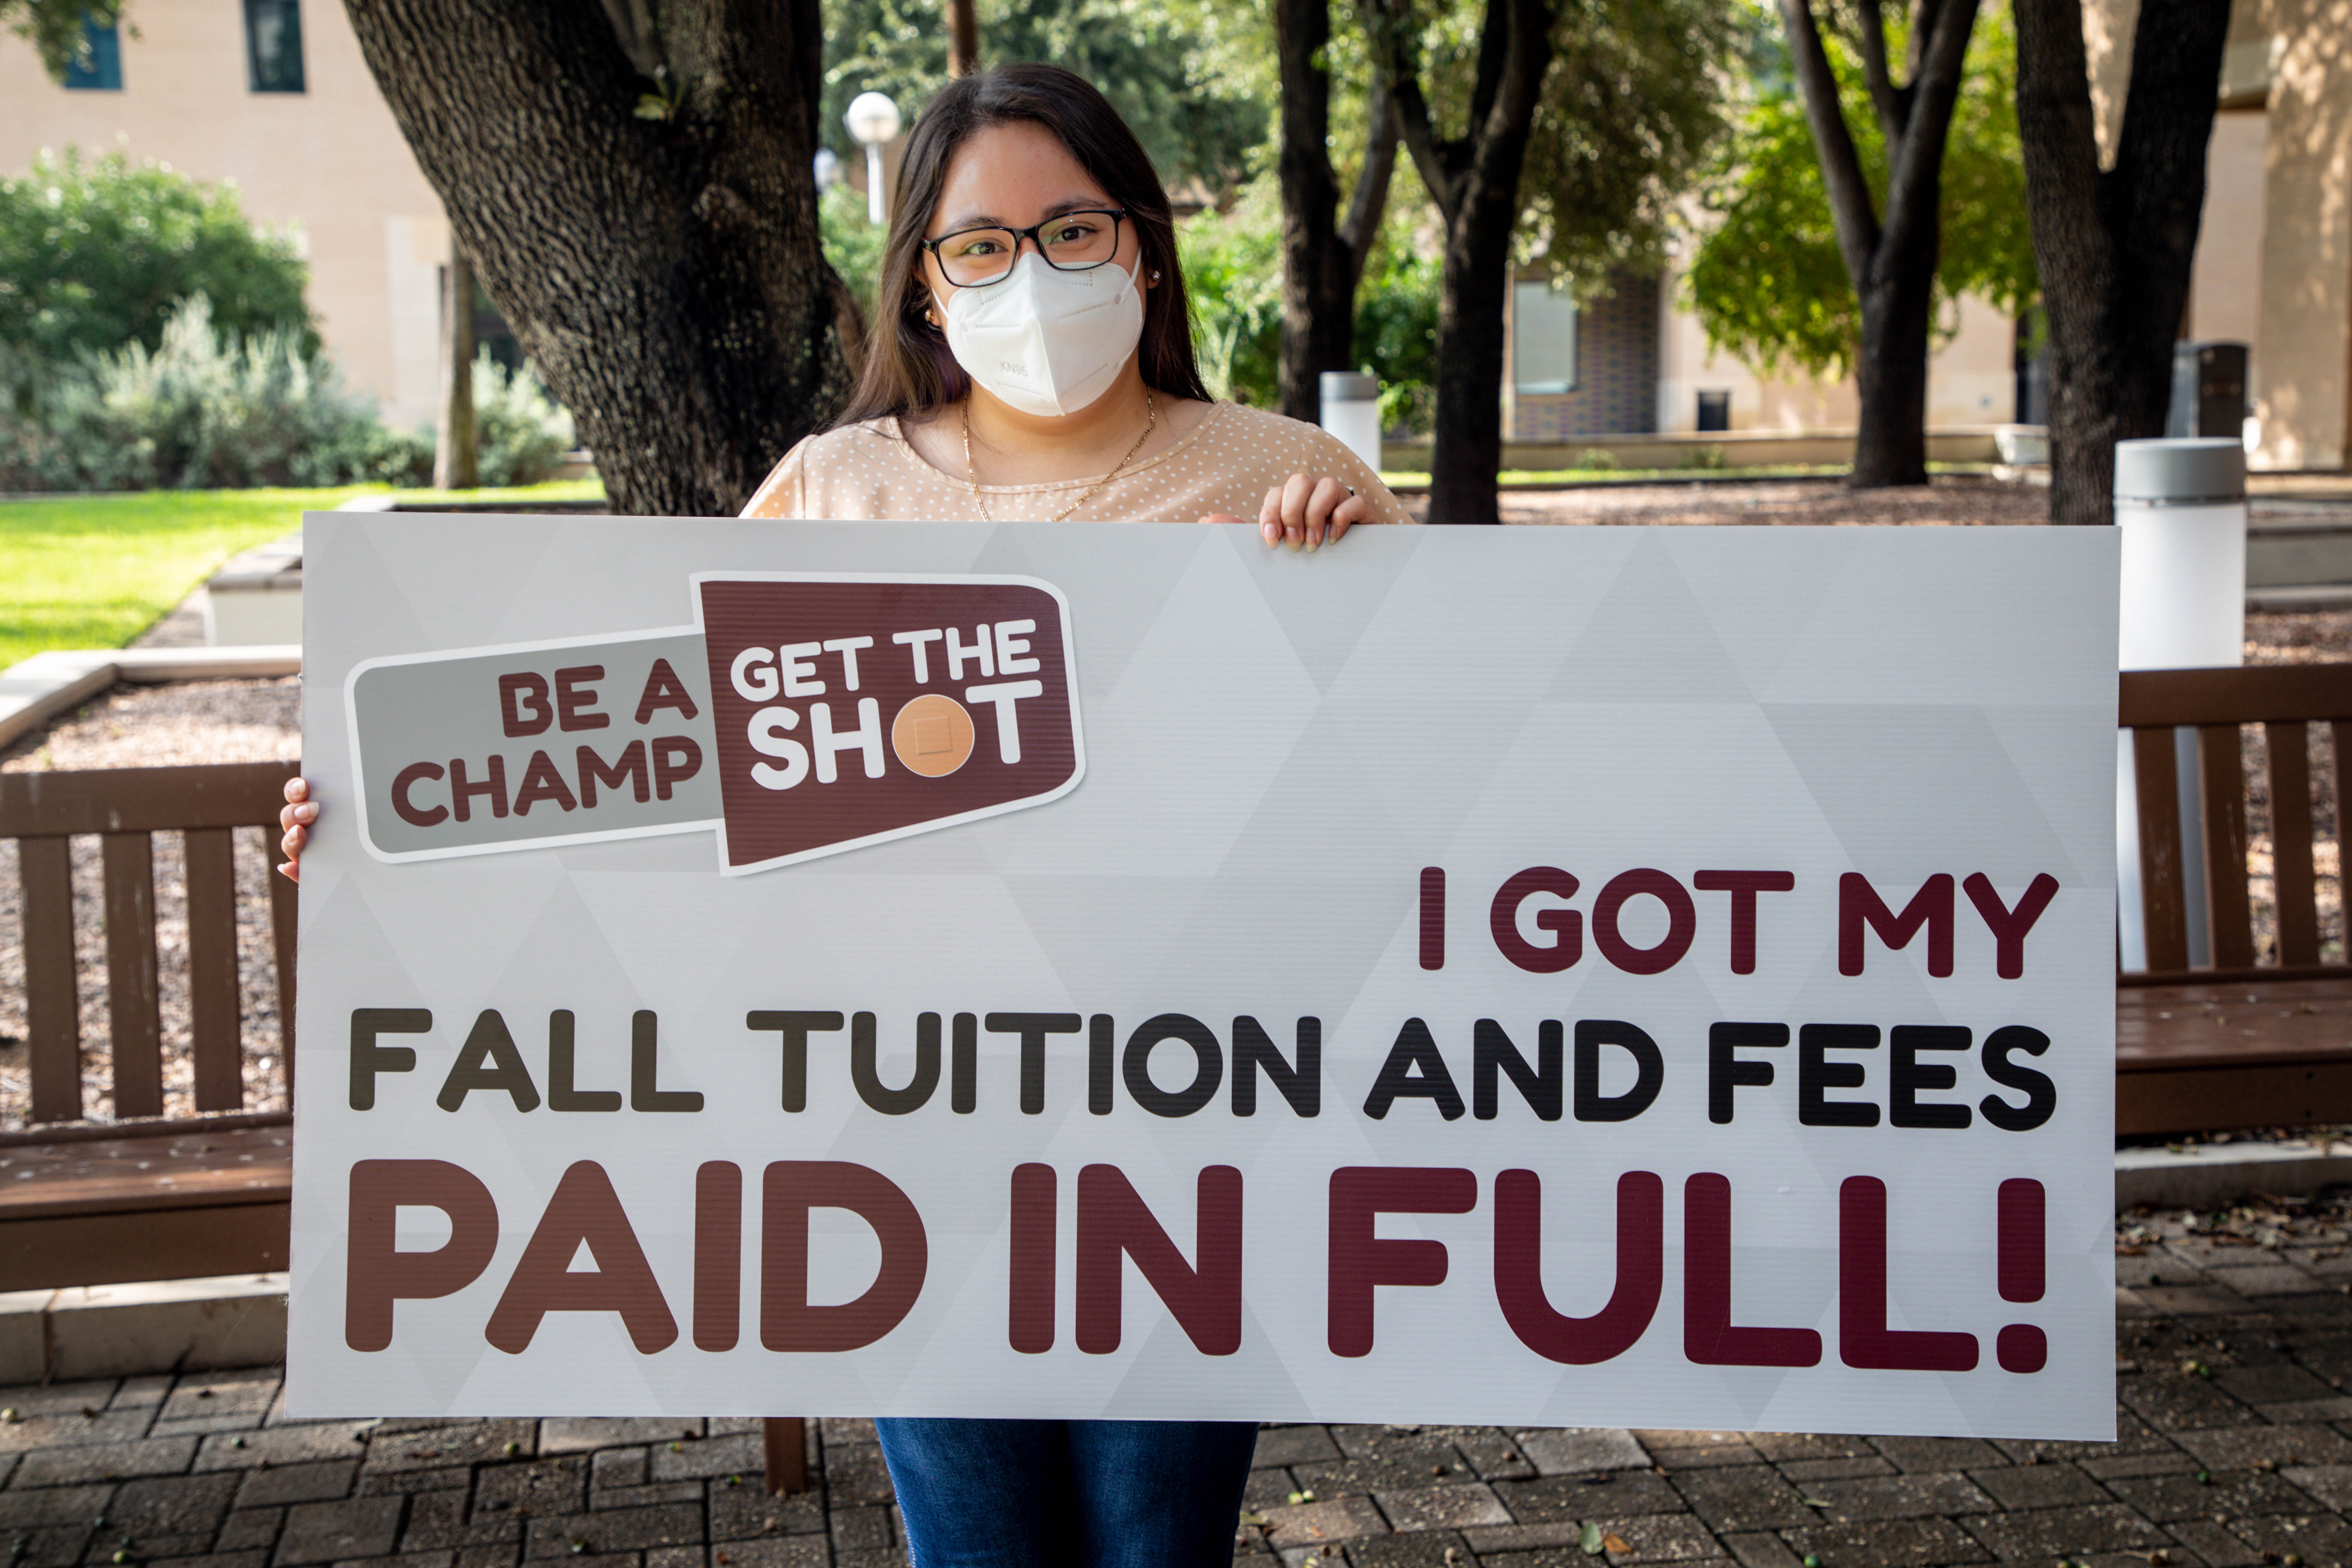 First Be A Champ grand prize winner holding a large sign saying "I got my Fall tuition and fees paid in full!"